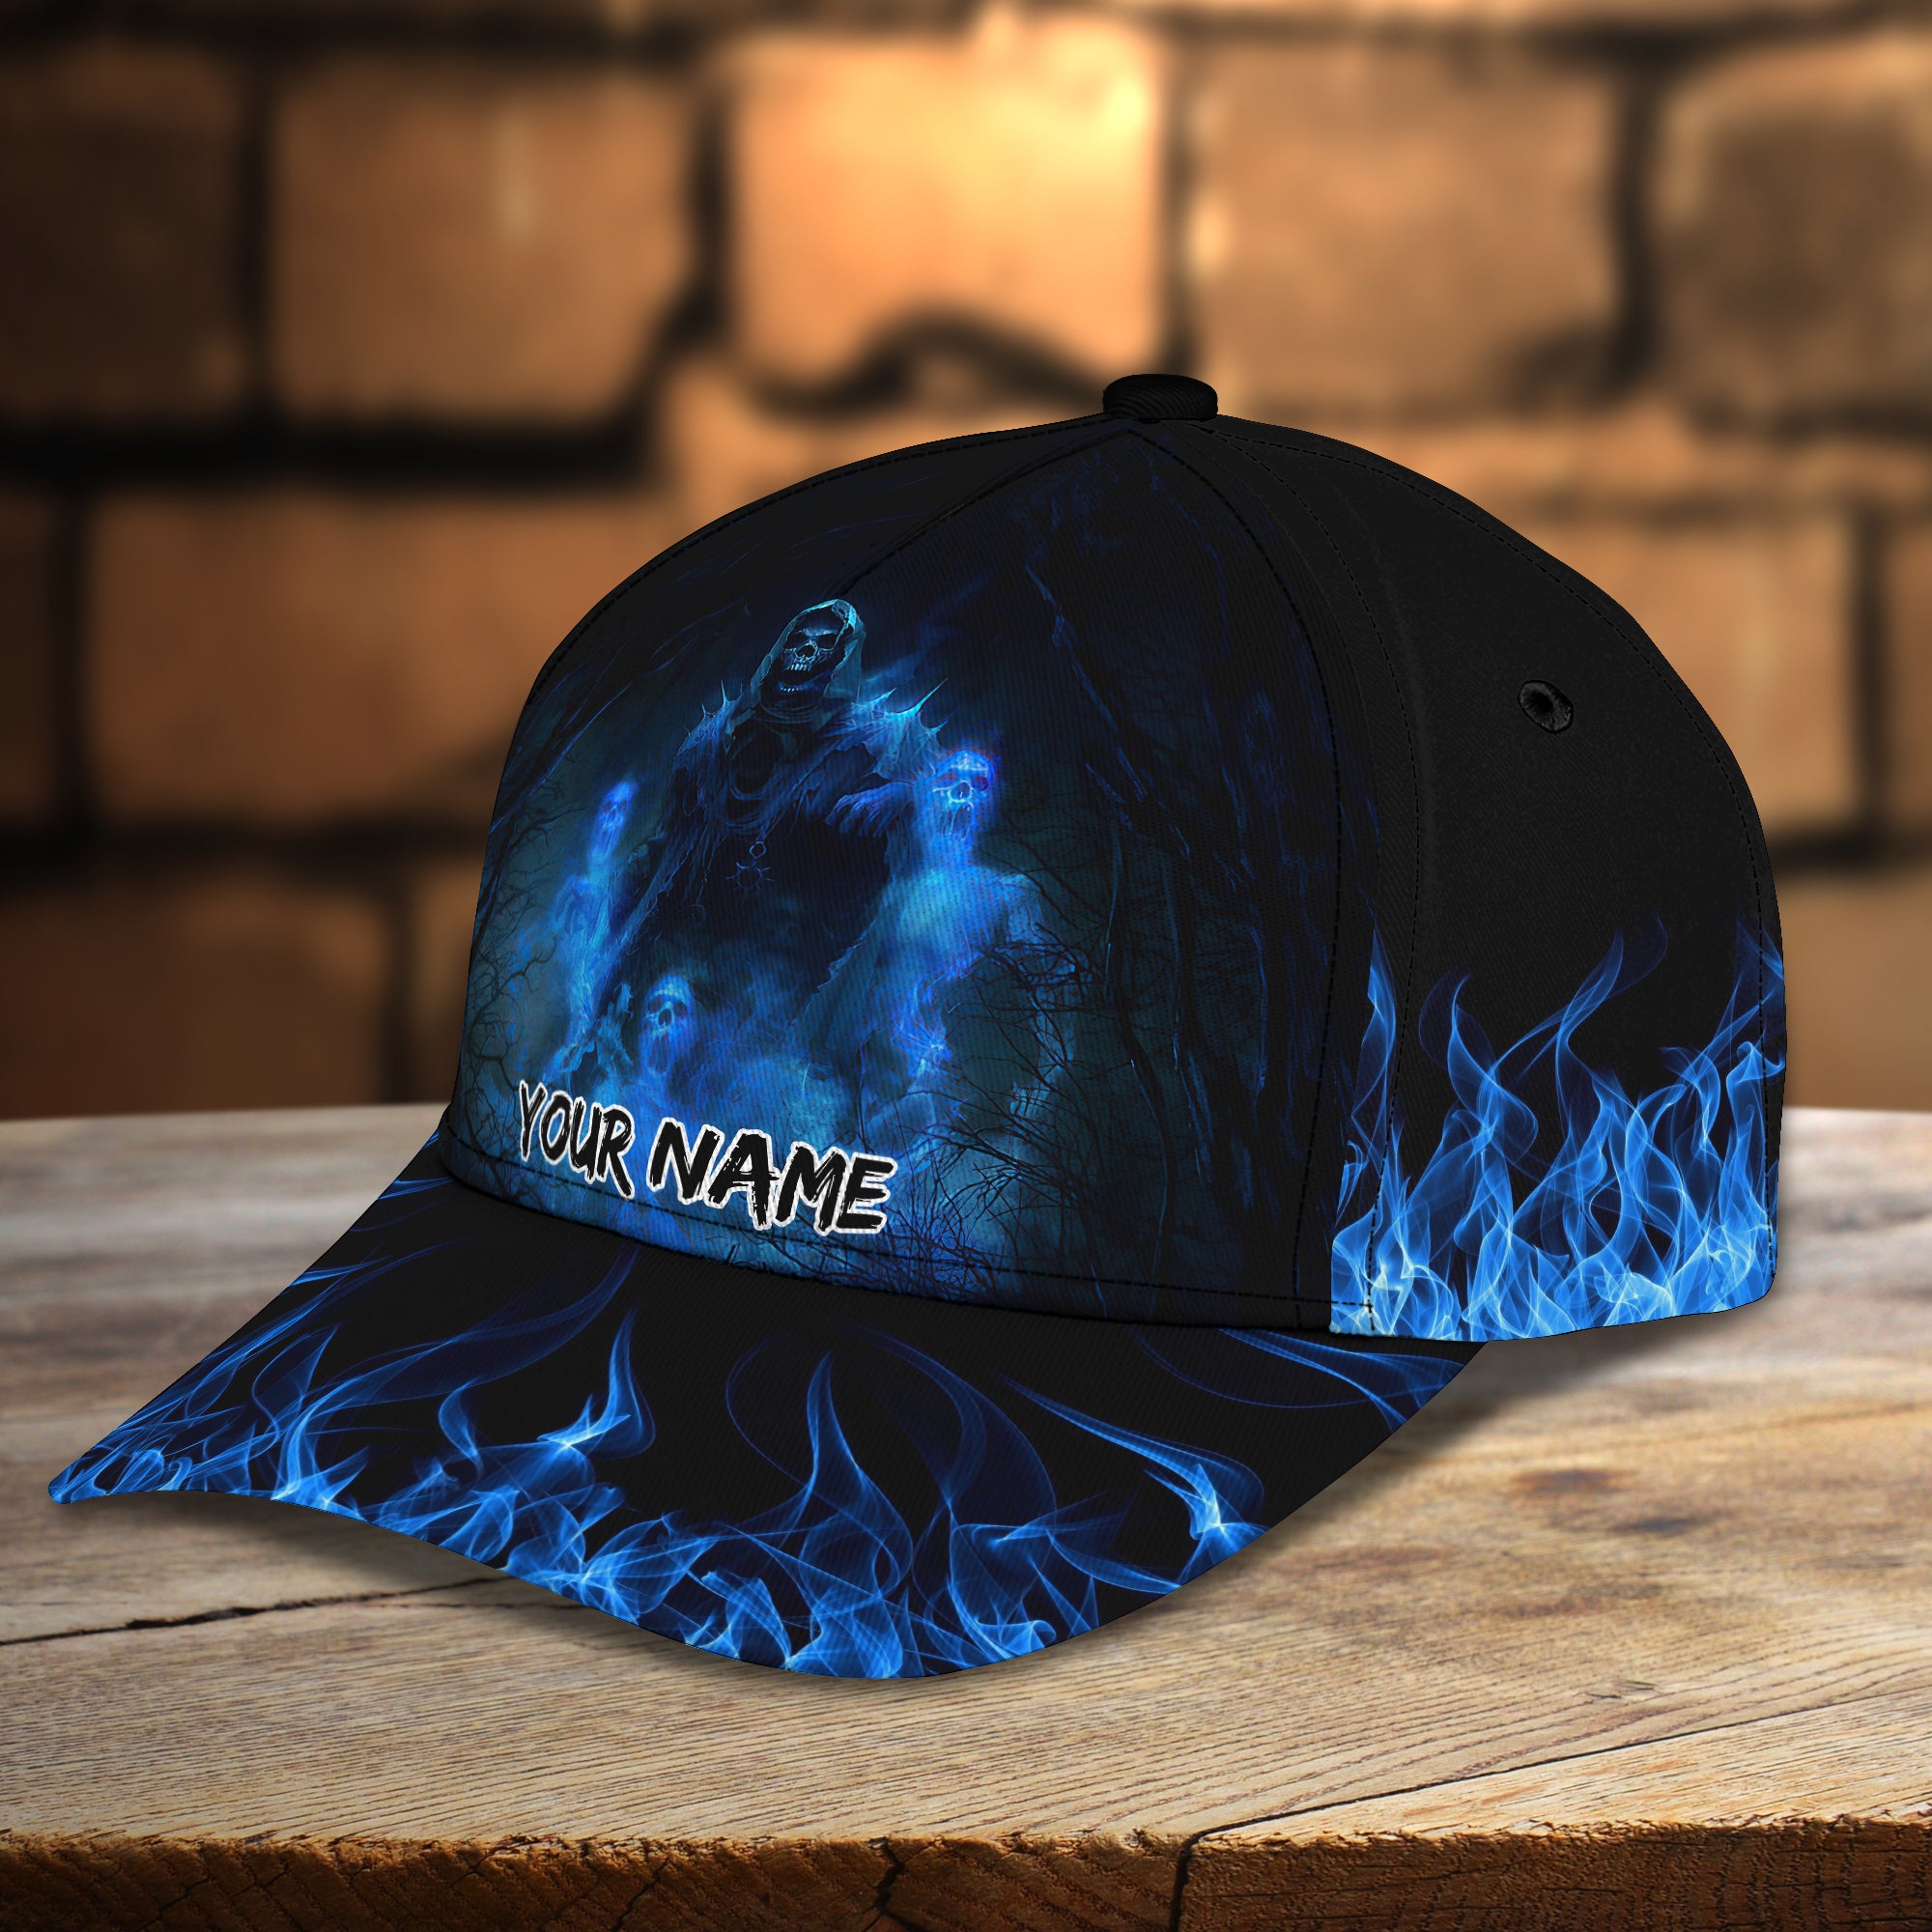 God Of Death - Personalized Name Cap - Urt96